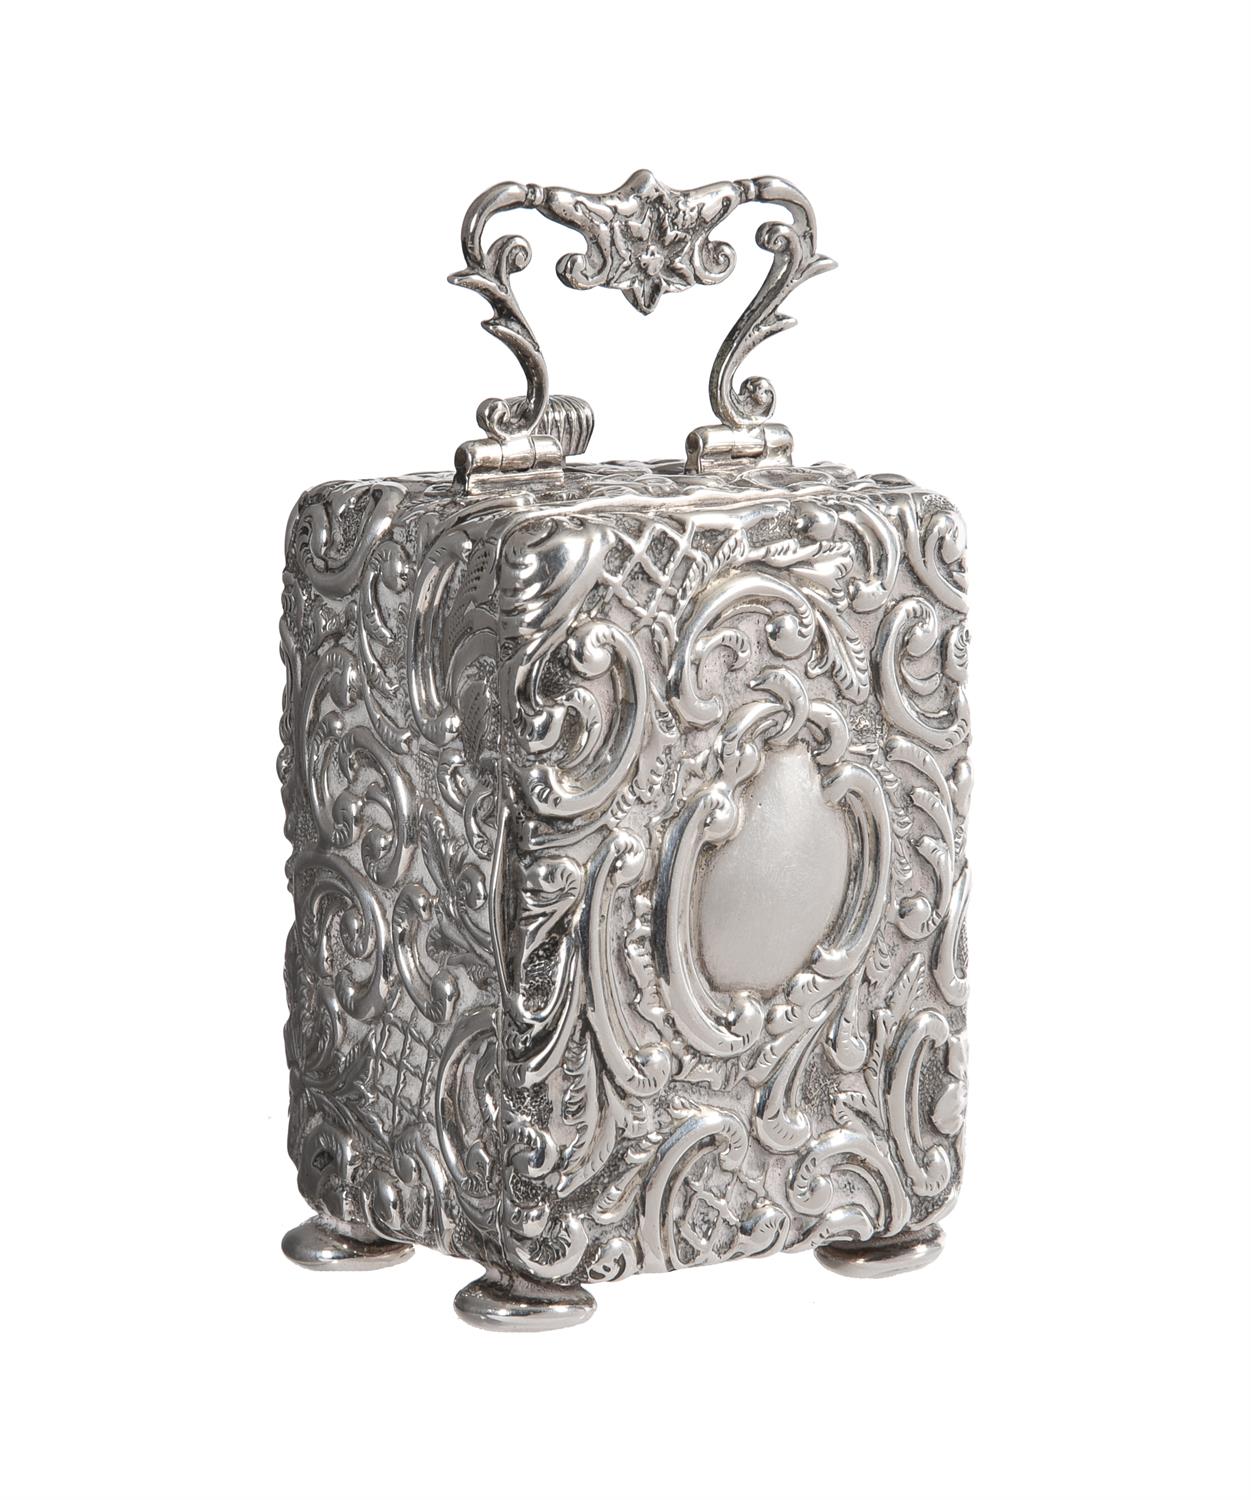 An Edwardian silver cased miniature carriage timepiece - Image 2 of 4